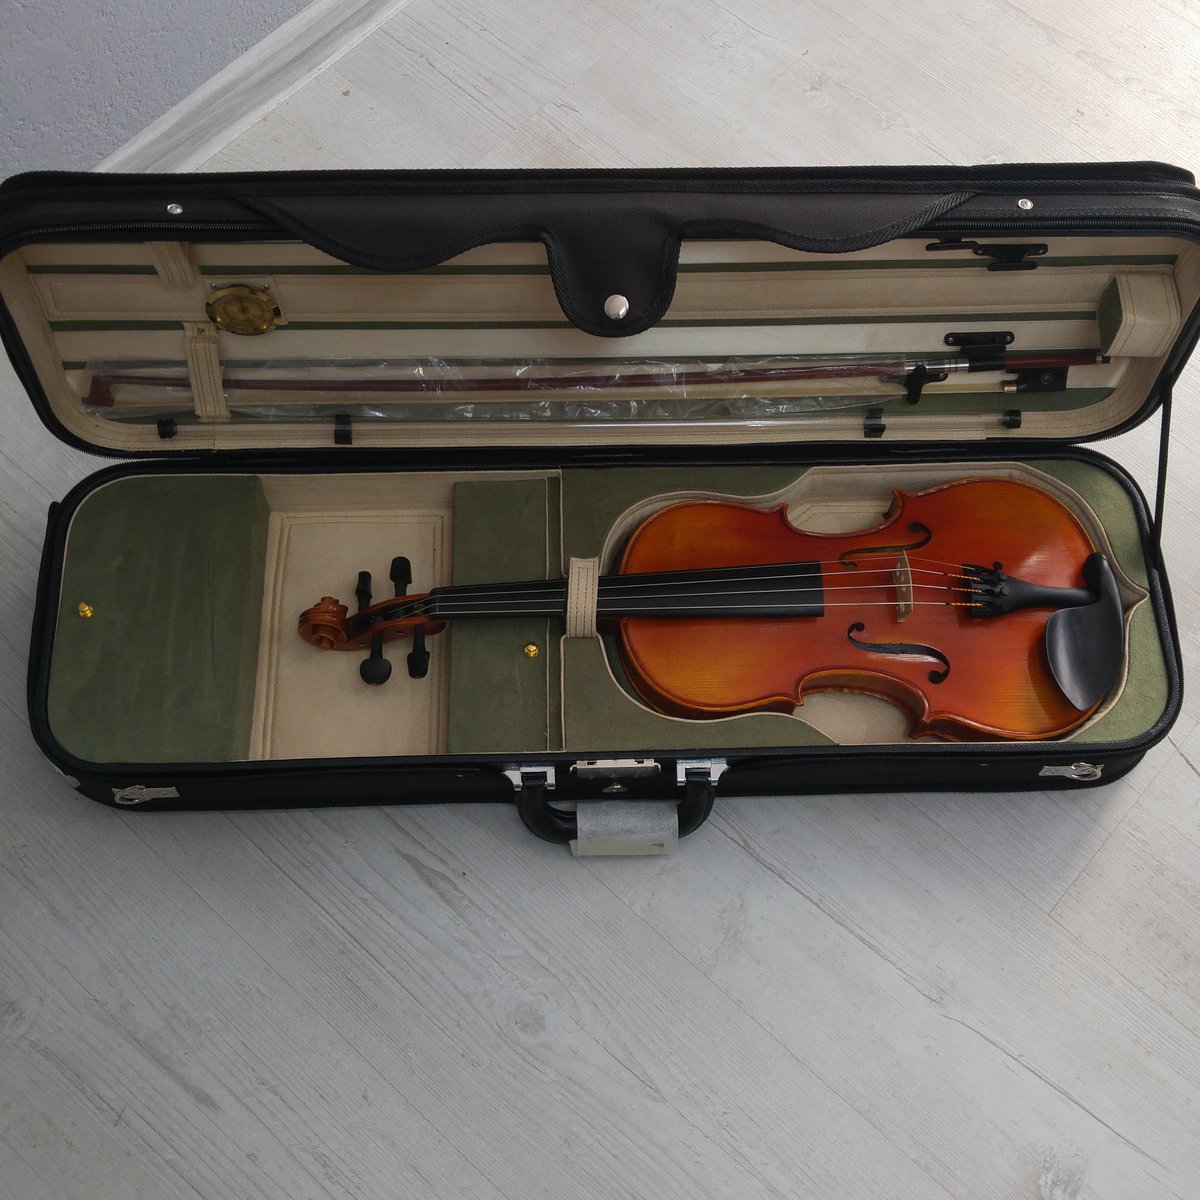 🎻 Created to fit beautifully 💕

#violin #violon #violino #geige #violine #violinplayer #violinlove #violinlover #violinlovers #violinstagram #mtunes_music #mcase_cases #mtunes_strings